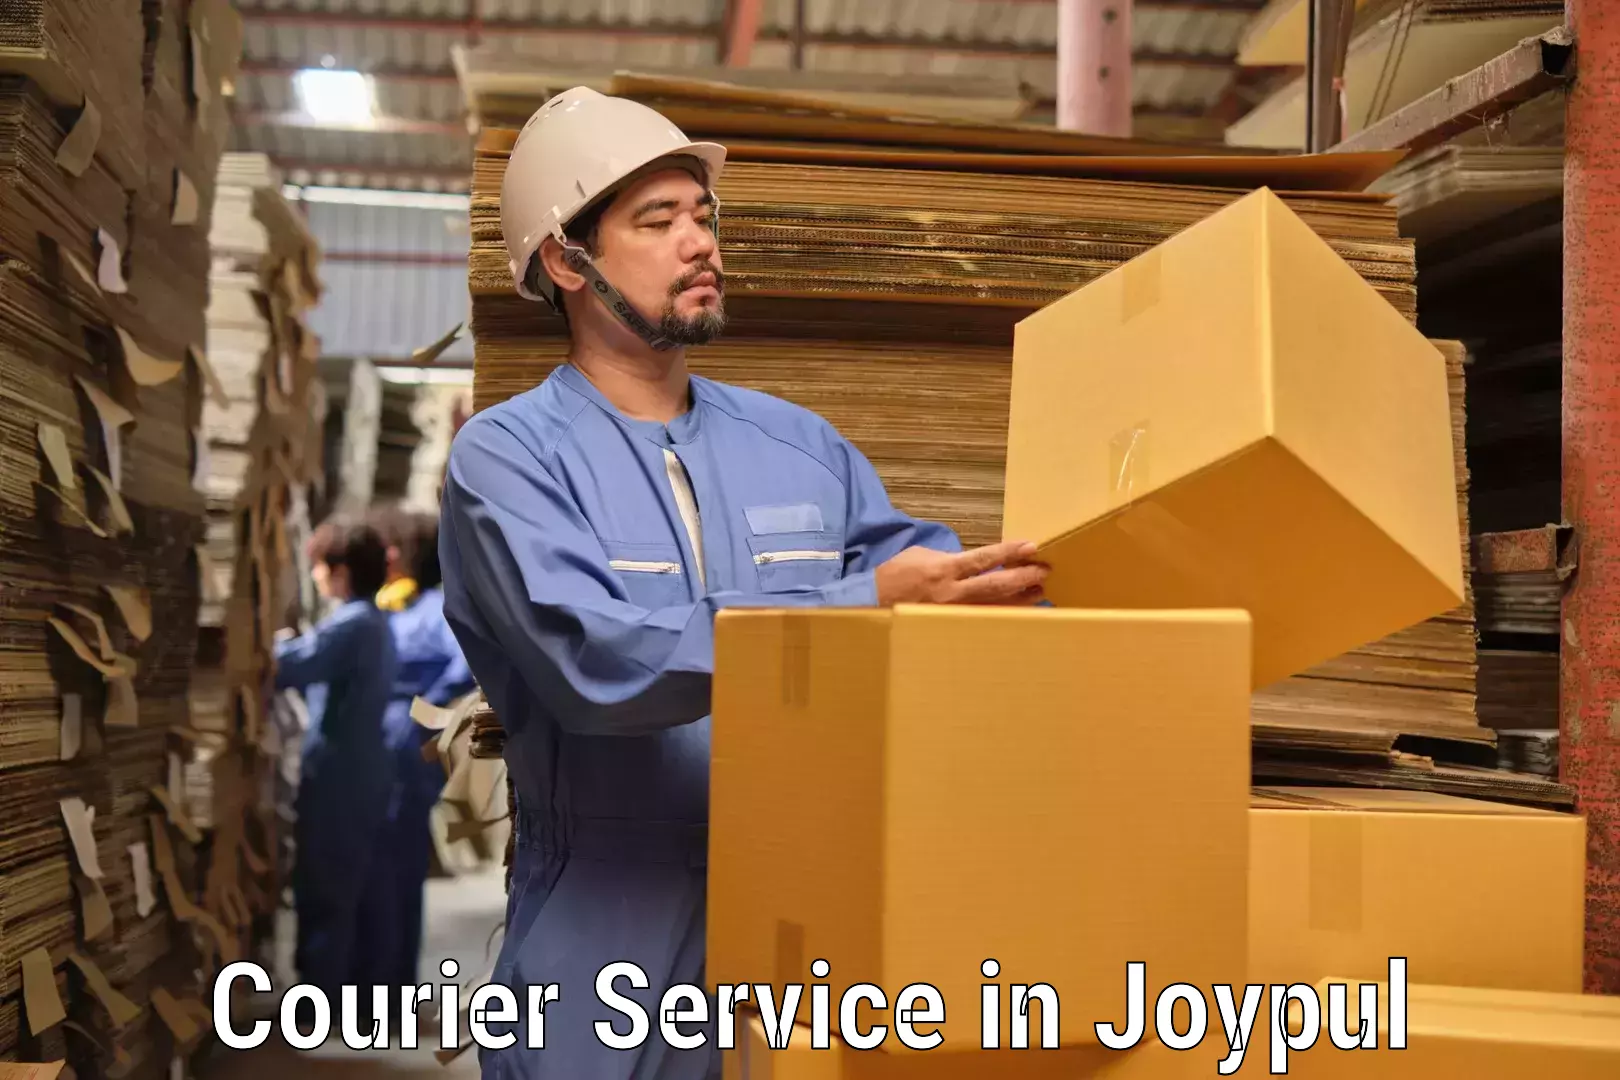 Efficient package consolidation in Joypul